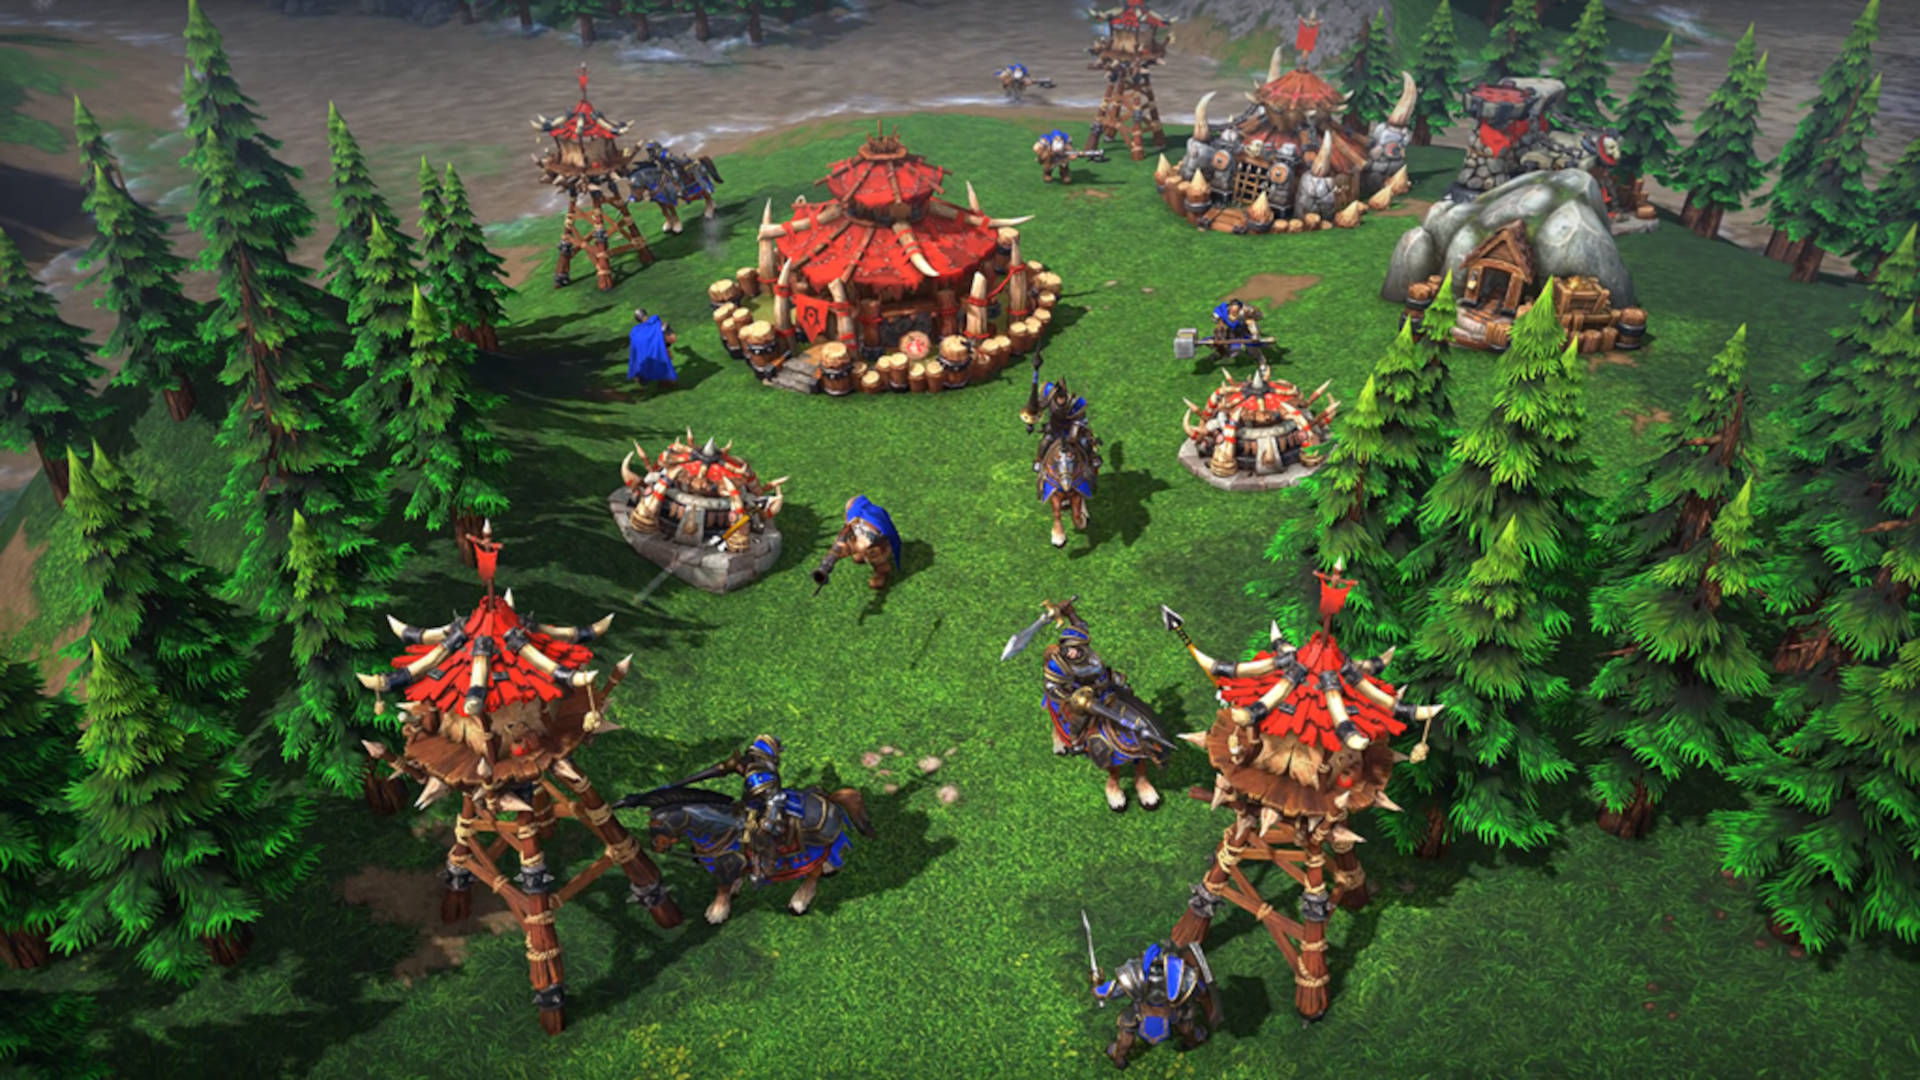 looking for fantasy & medieval old rts/tower defense style game on